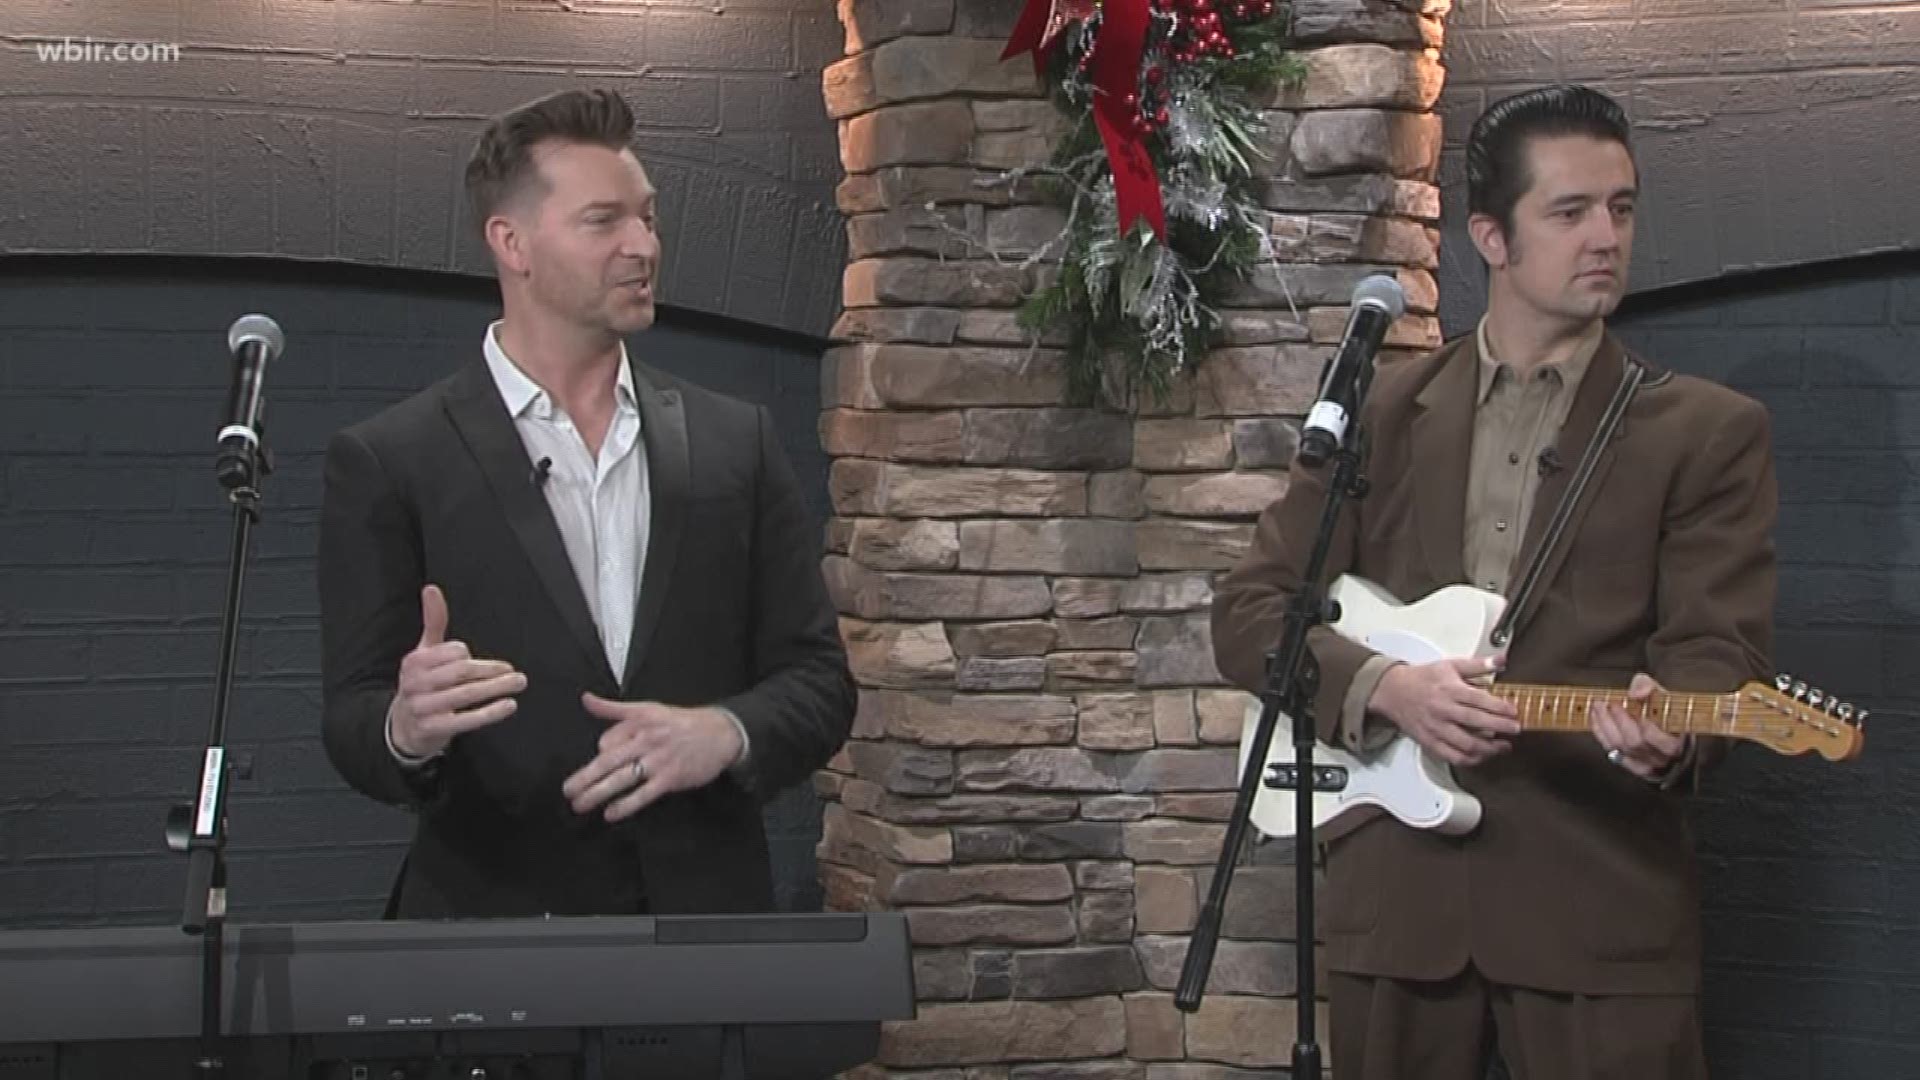 Levi Kreis has a Christmas album full of some favorite Christmas songs. You can learn more at levikreis.com. Dec. 12, 2018-4pm